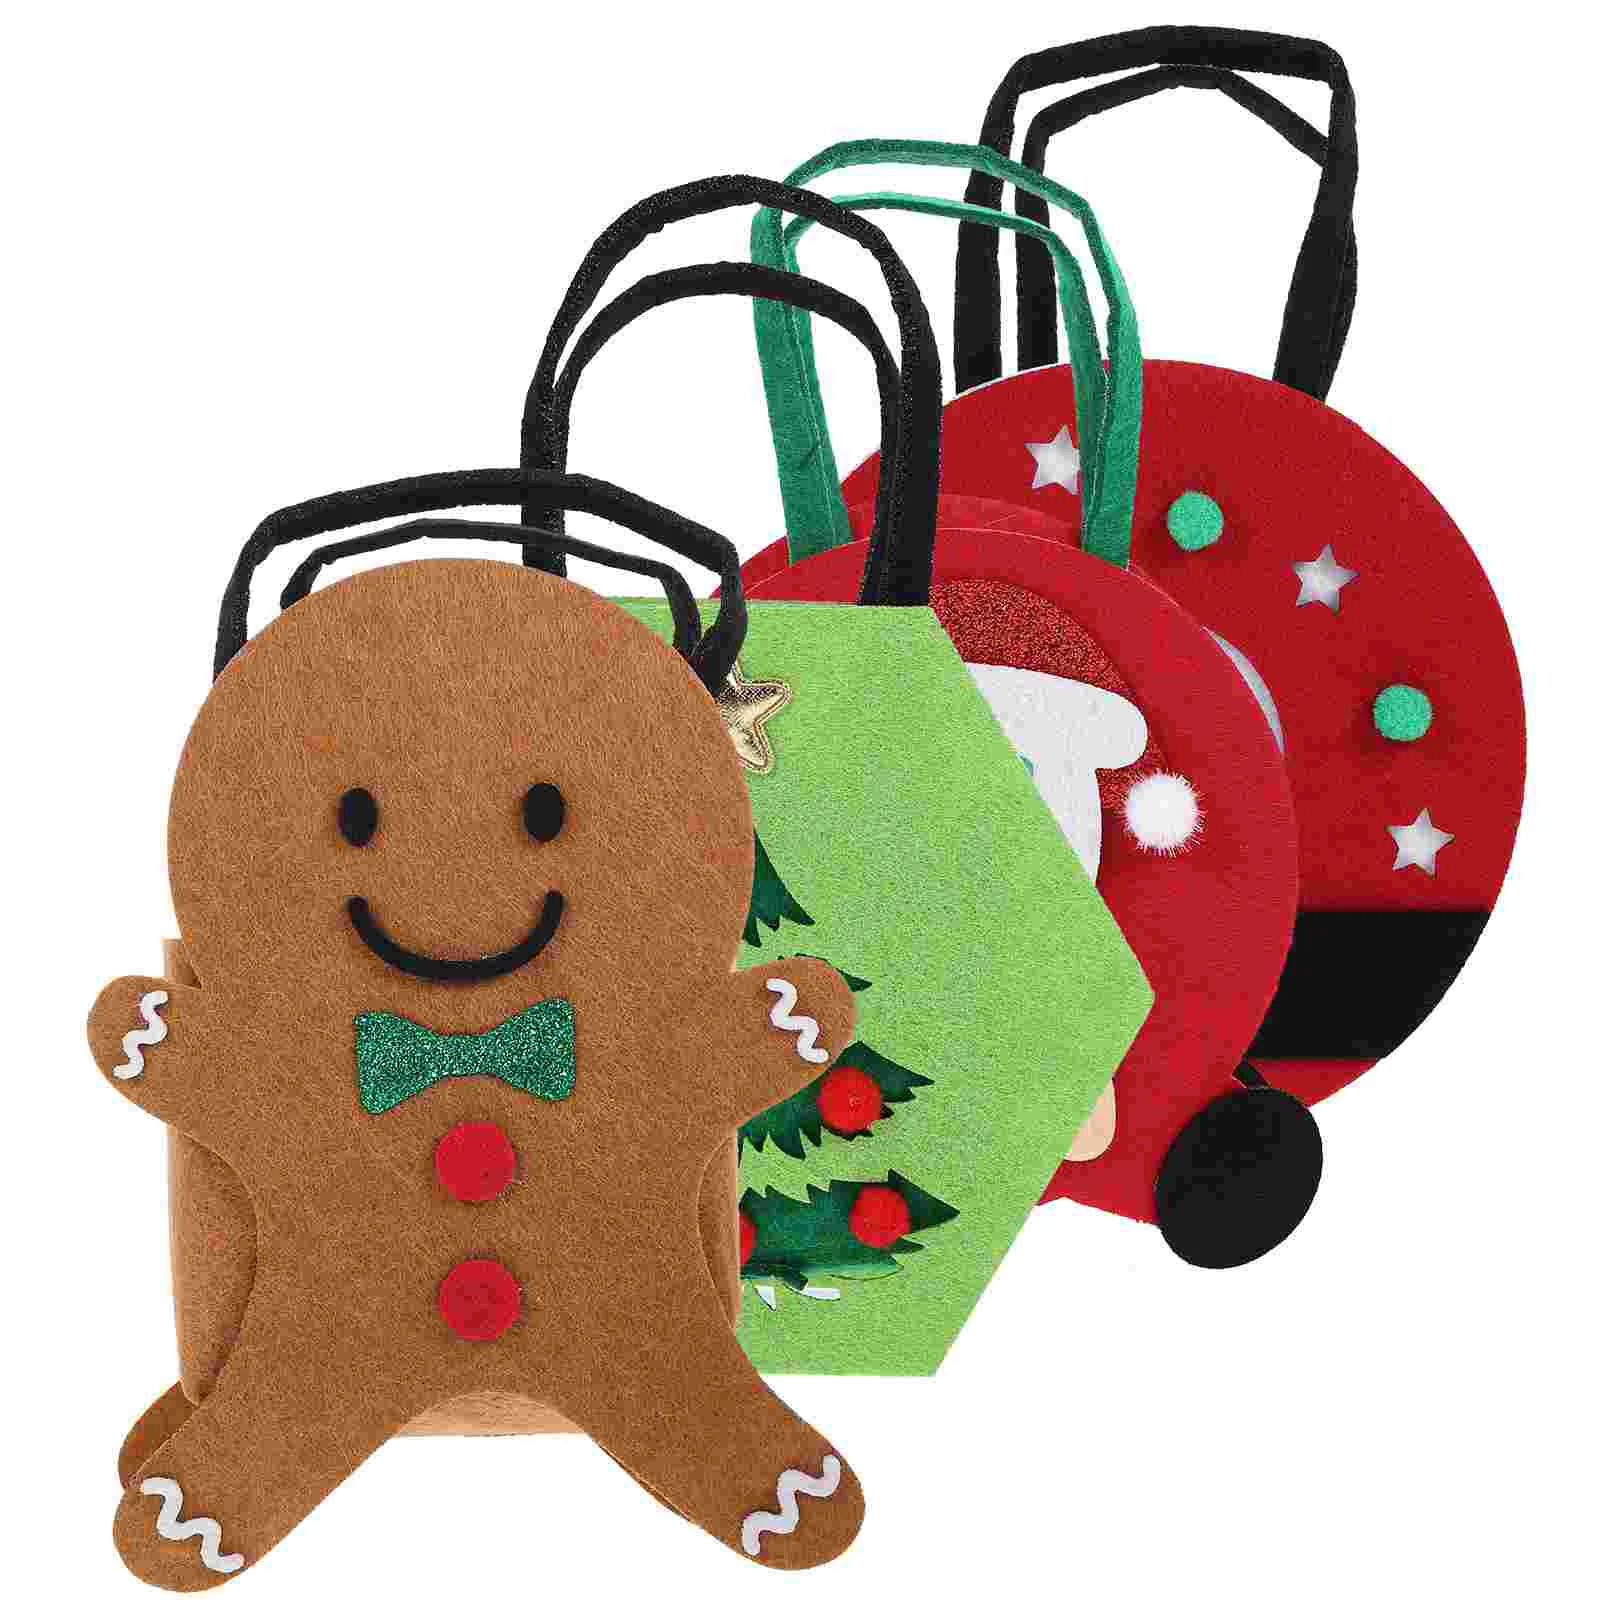 

4 Pcs The Gift Christmas Felt Tote Bag Wrapping Bags Presents Bulk Child Candy Holder